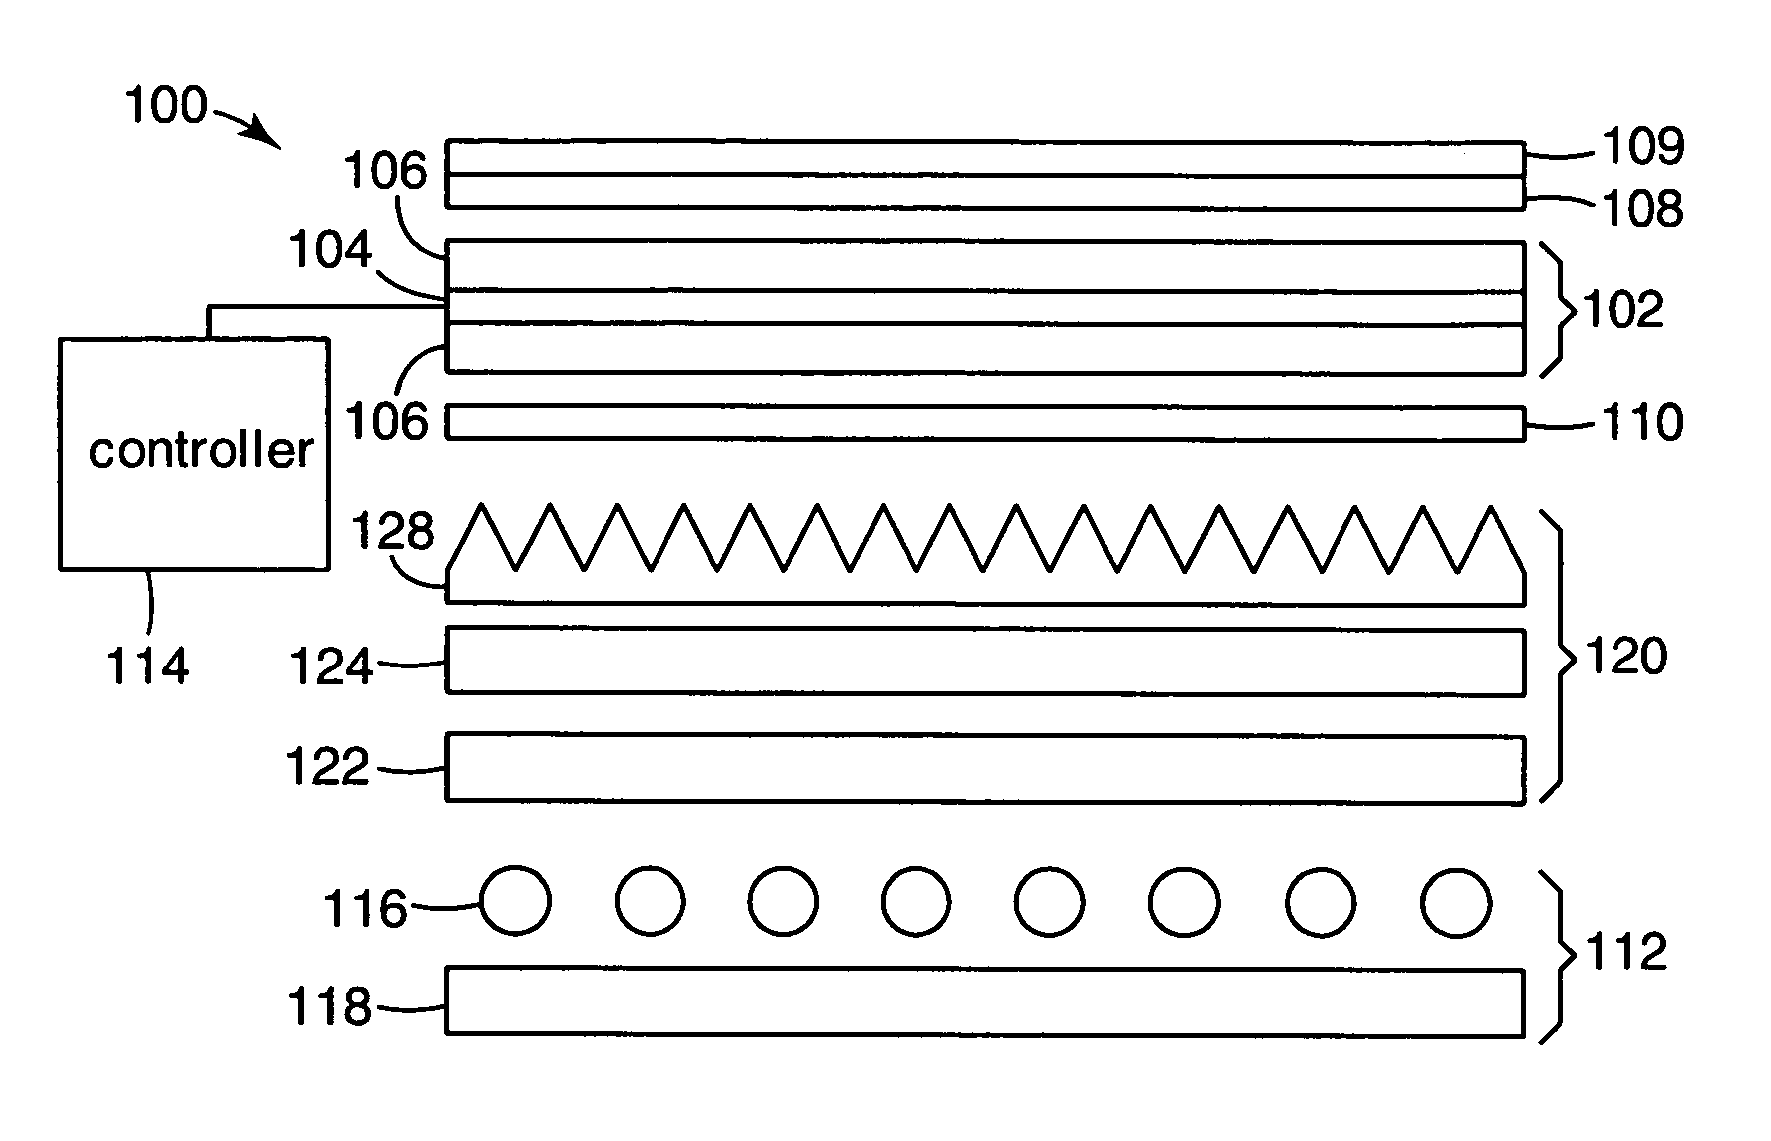 Liquid crystal displays with laminated diffuser plates